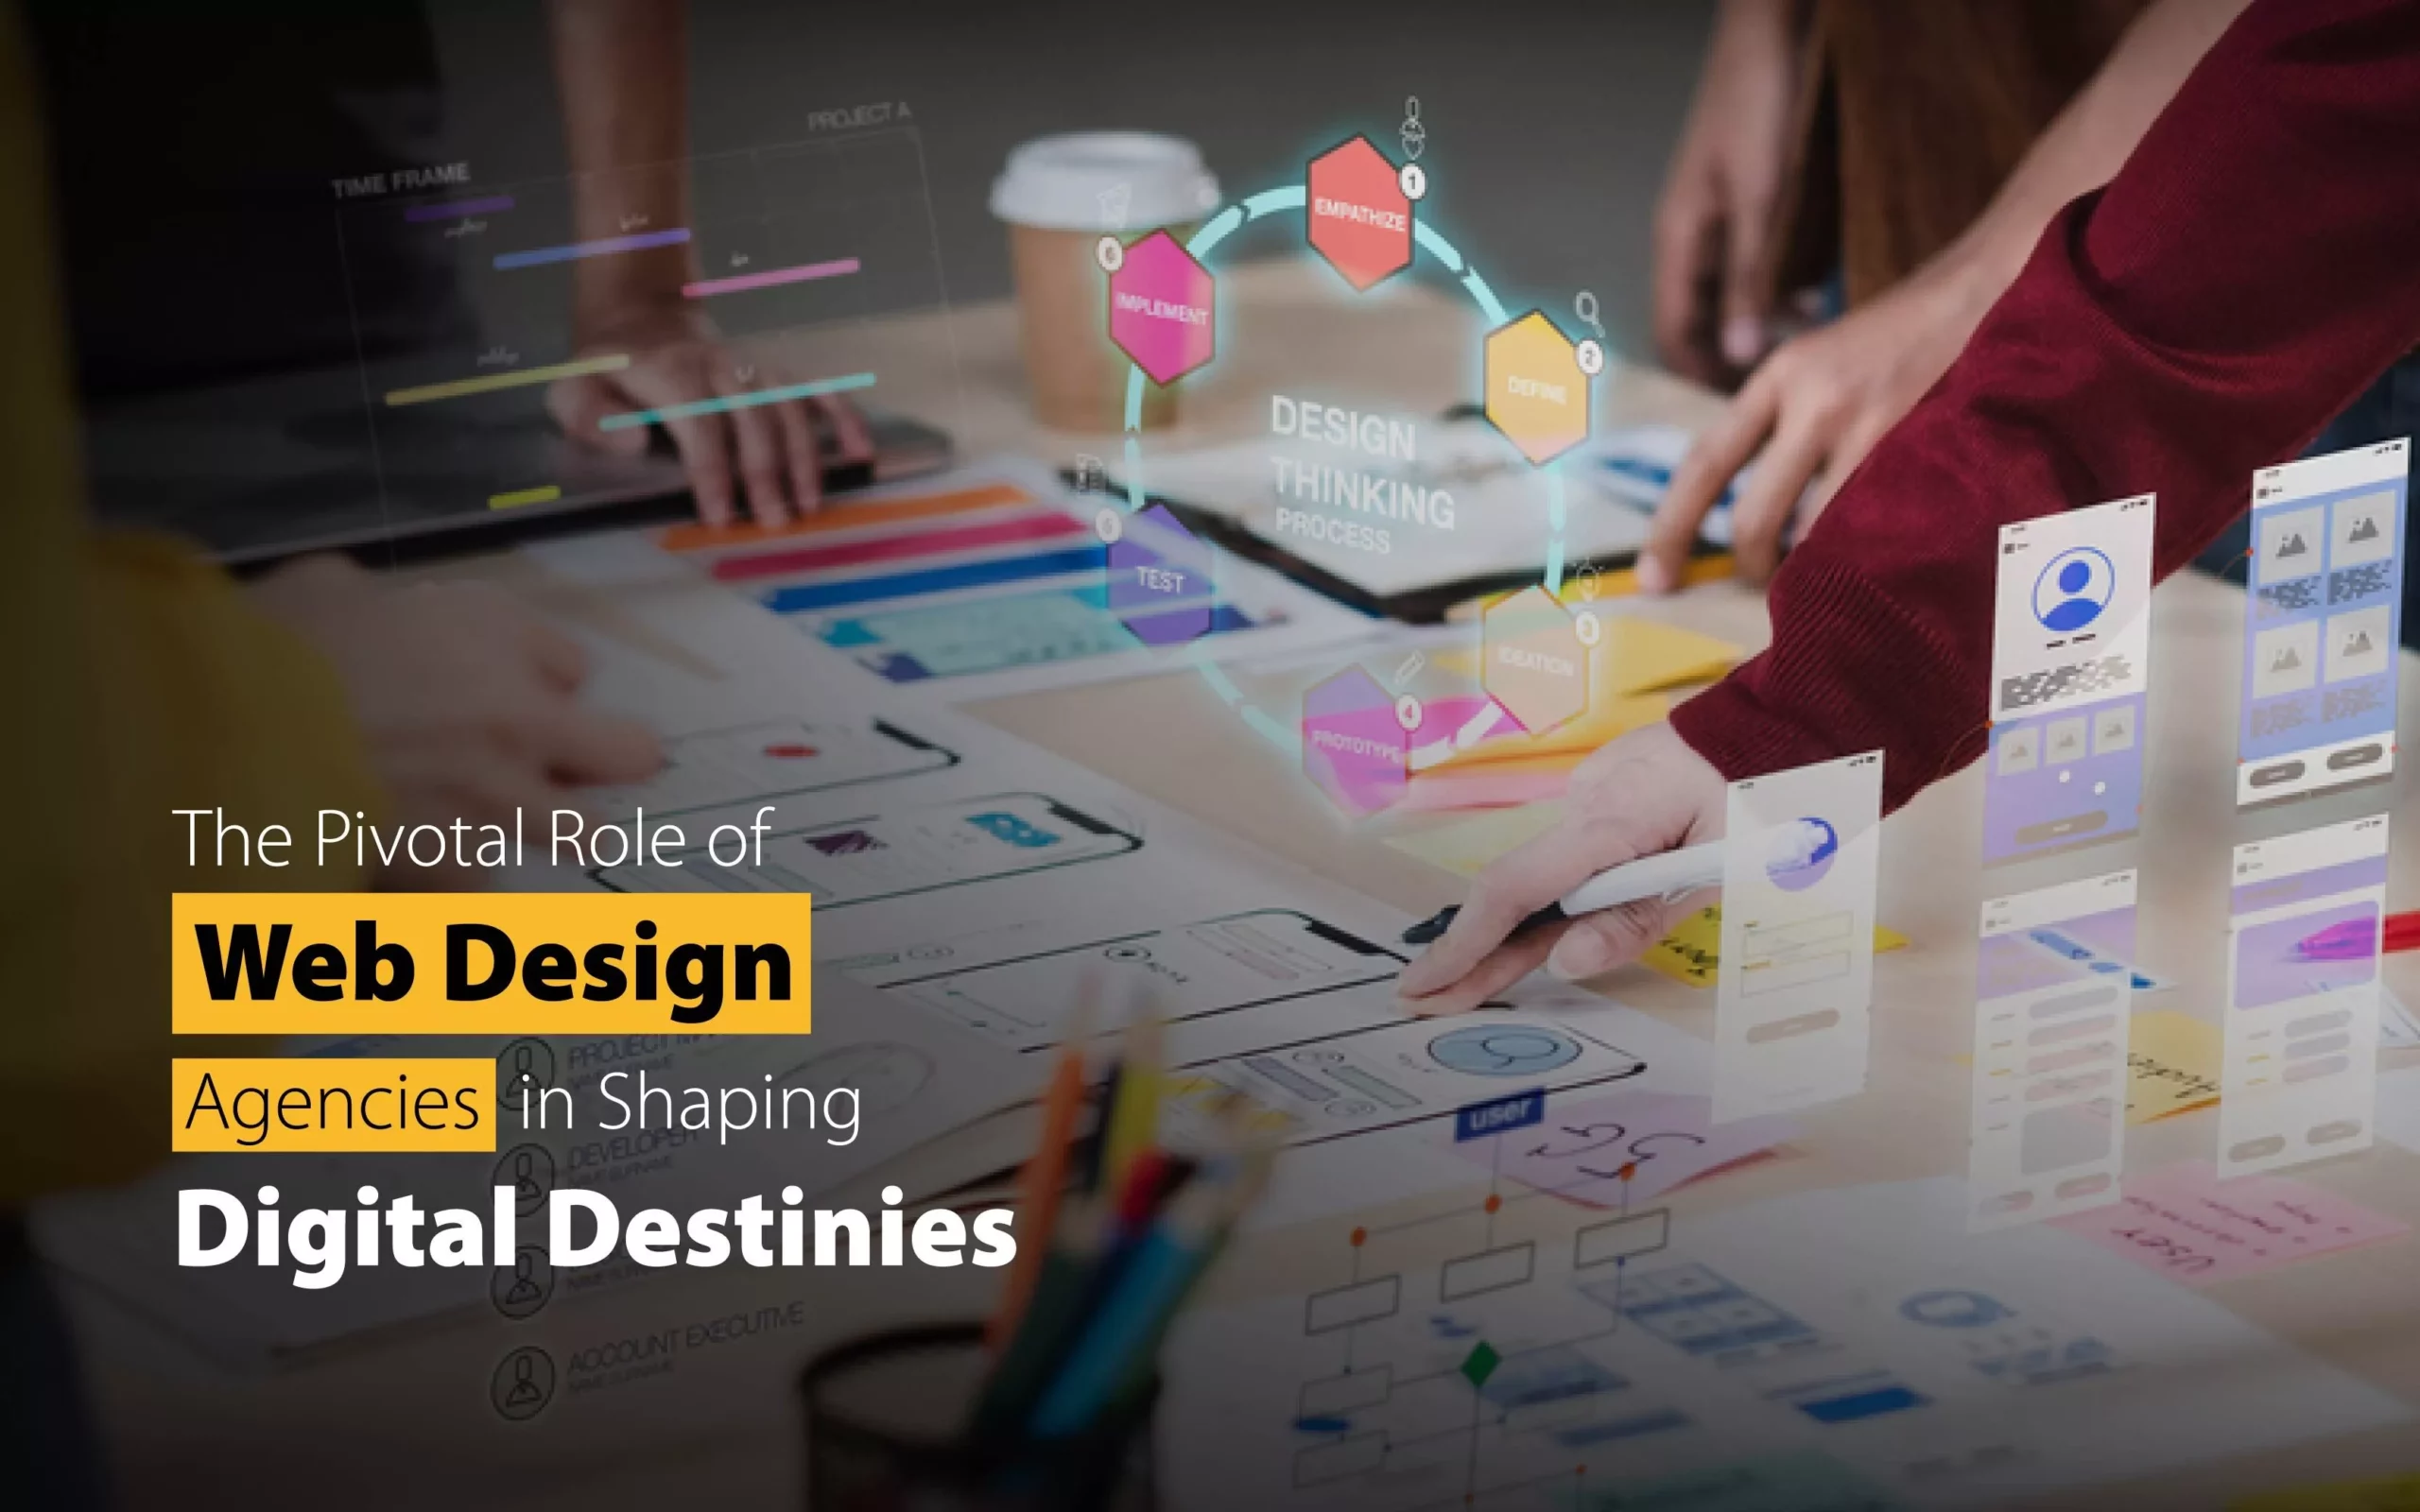 The Pivotal Role of Web Design Agencies in Shaping Digital Destinies